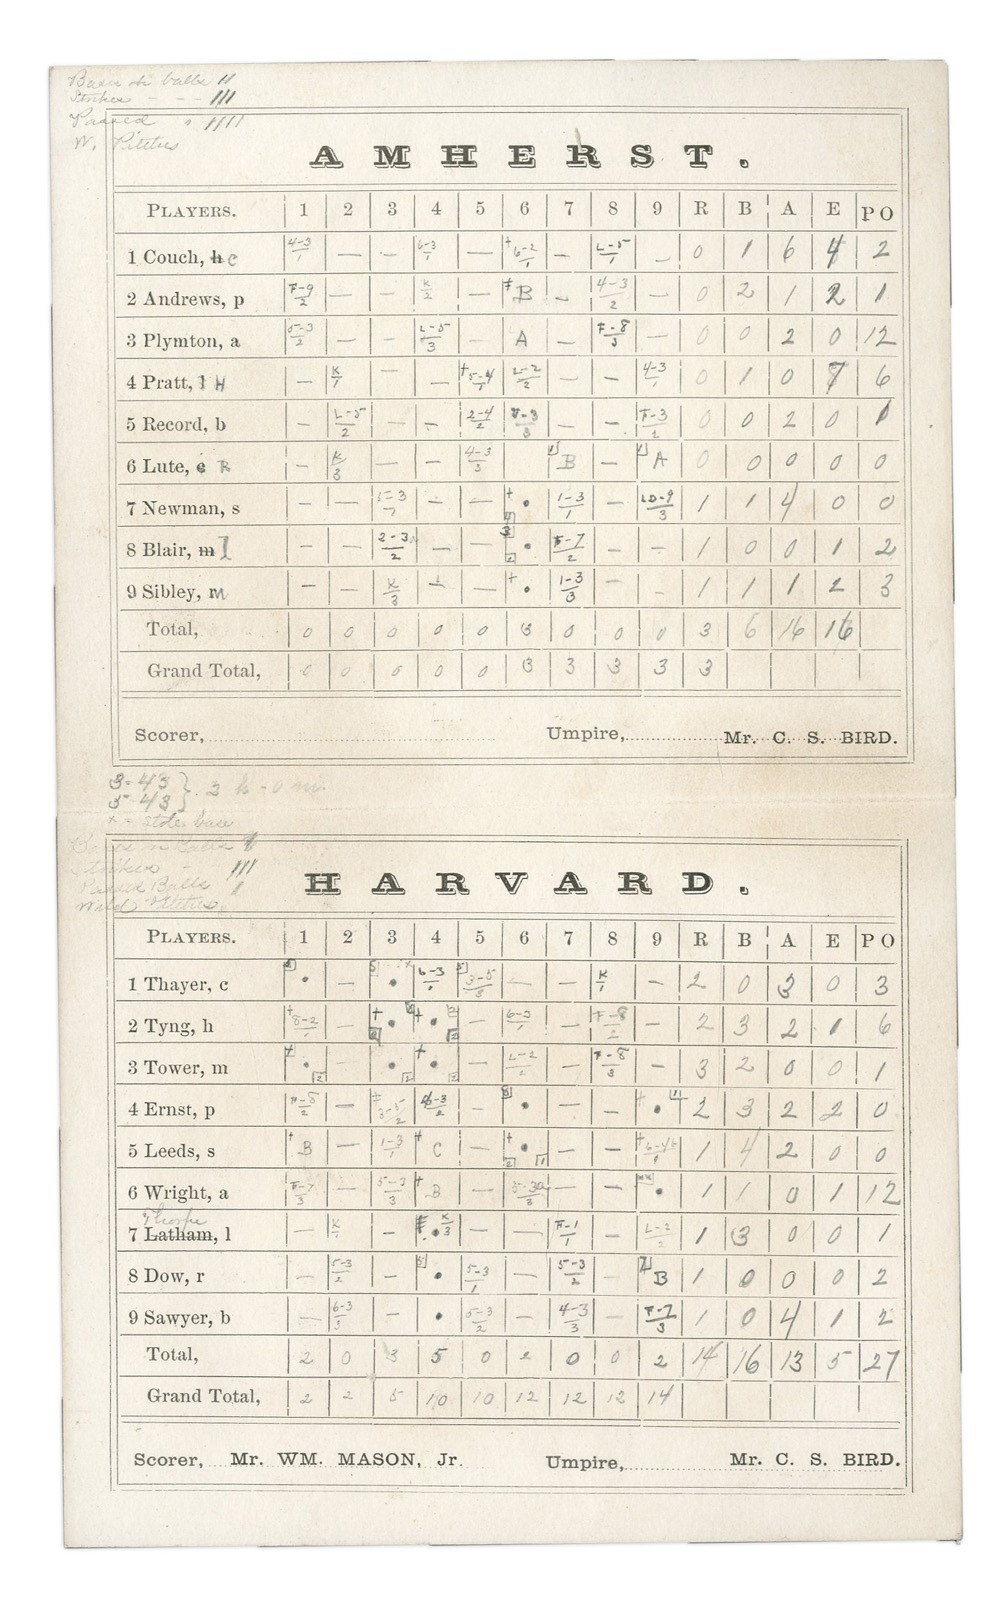 The Ivy League And Collegiate Program Archive - Circa 1877 Harvard Baseball Scorecard and Season Tickets with Thayer & Tyng